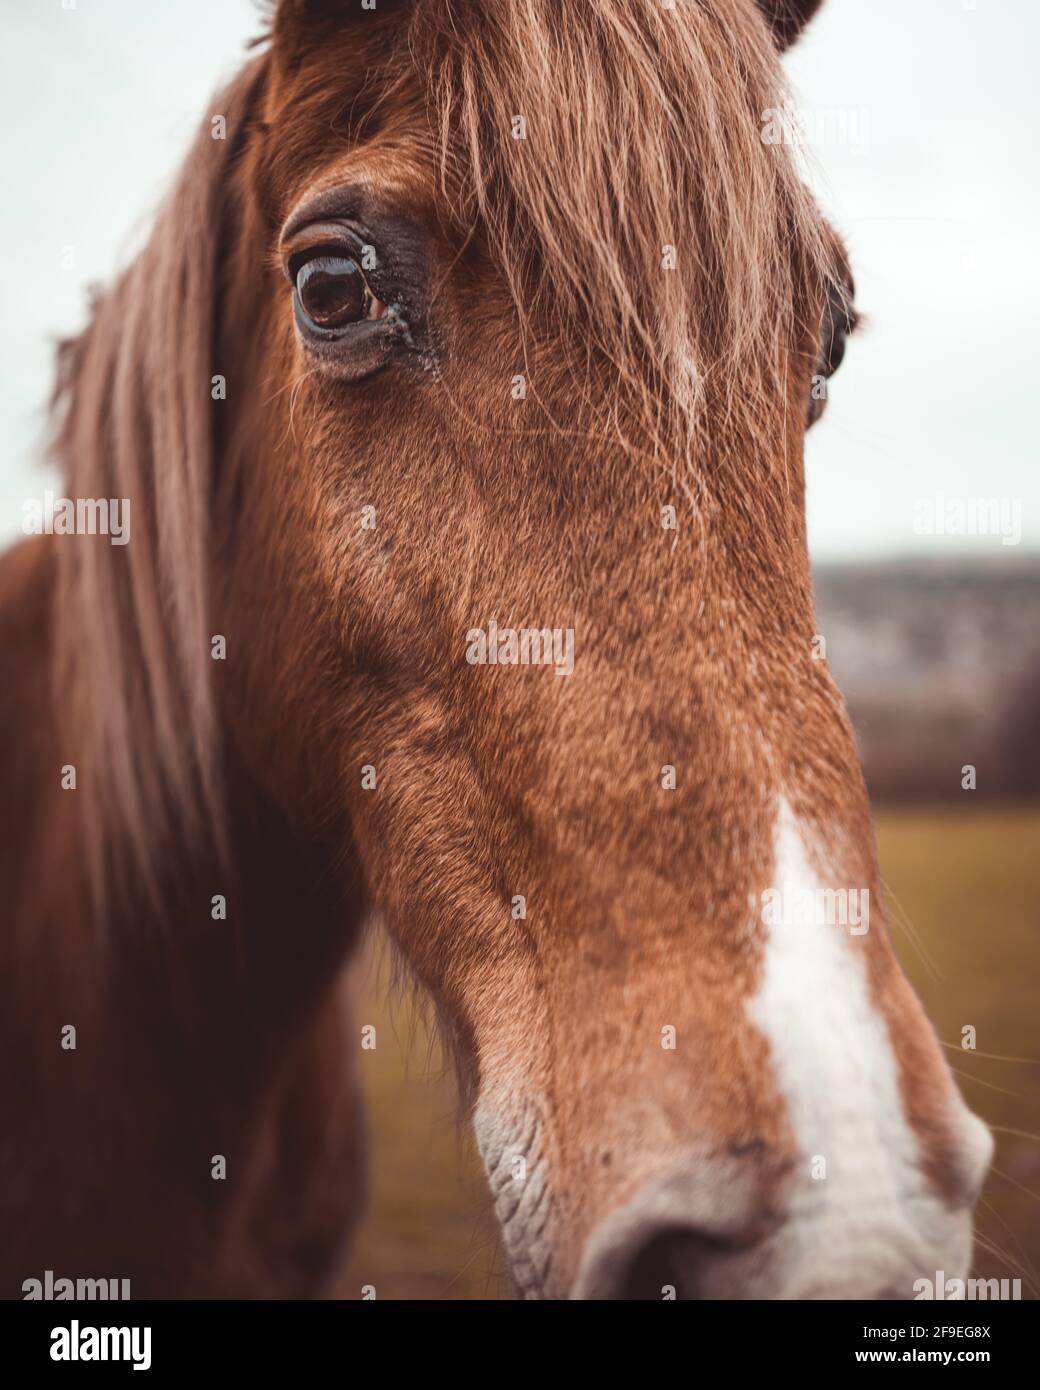 Close up portrait of a horse in a field Stock Photo